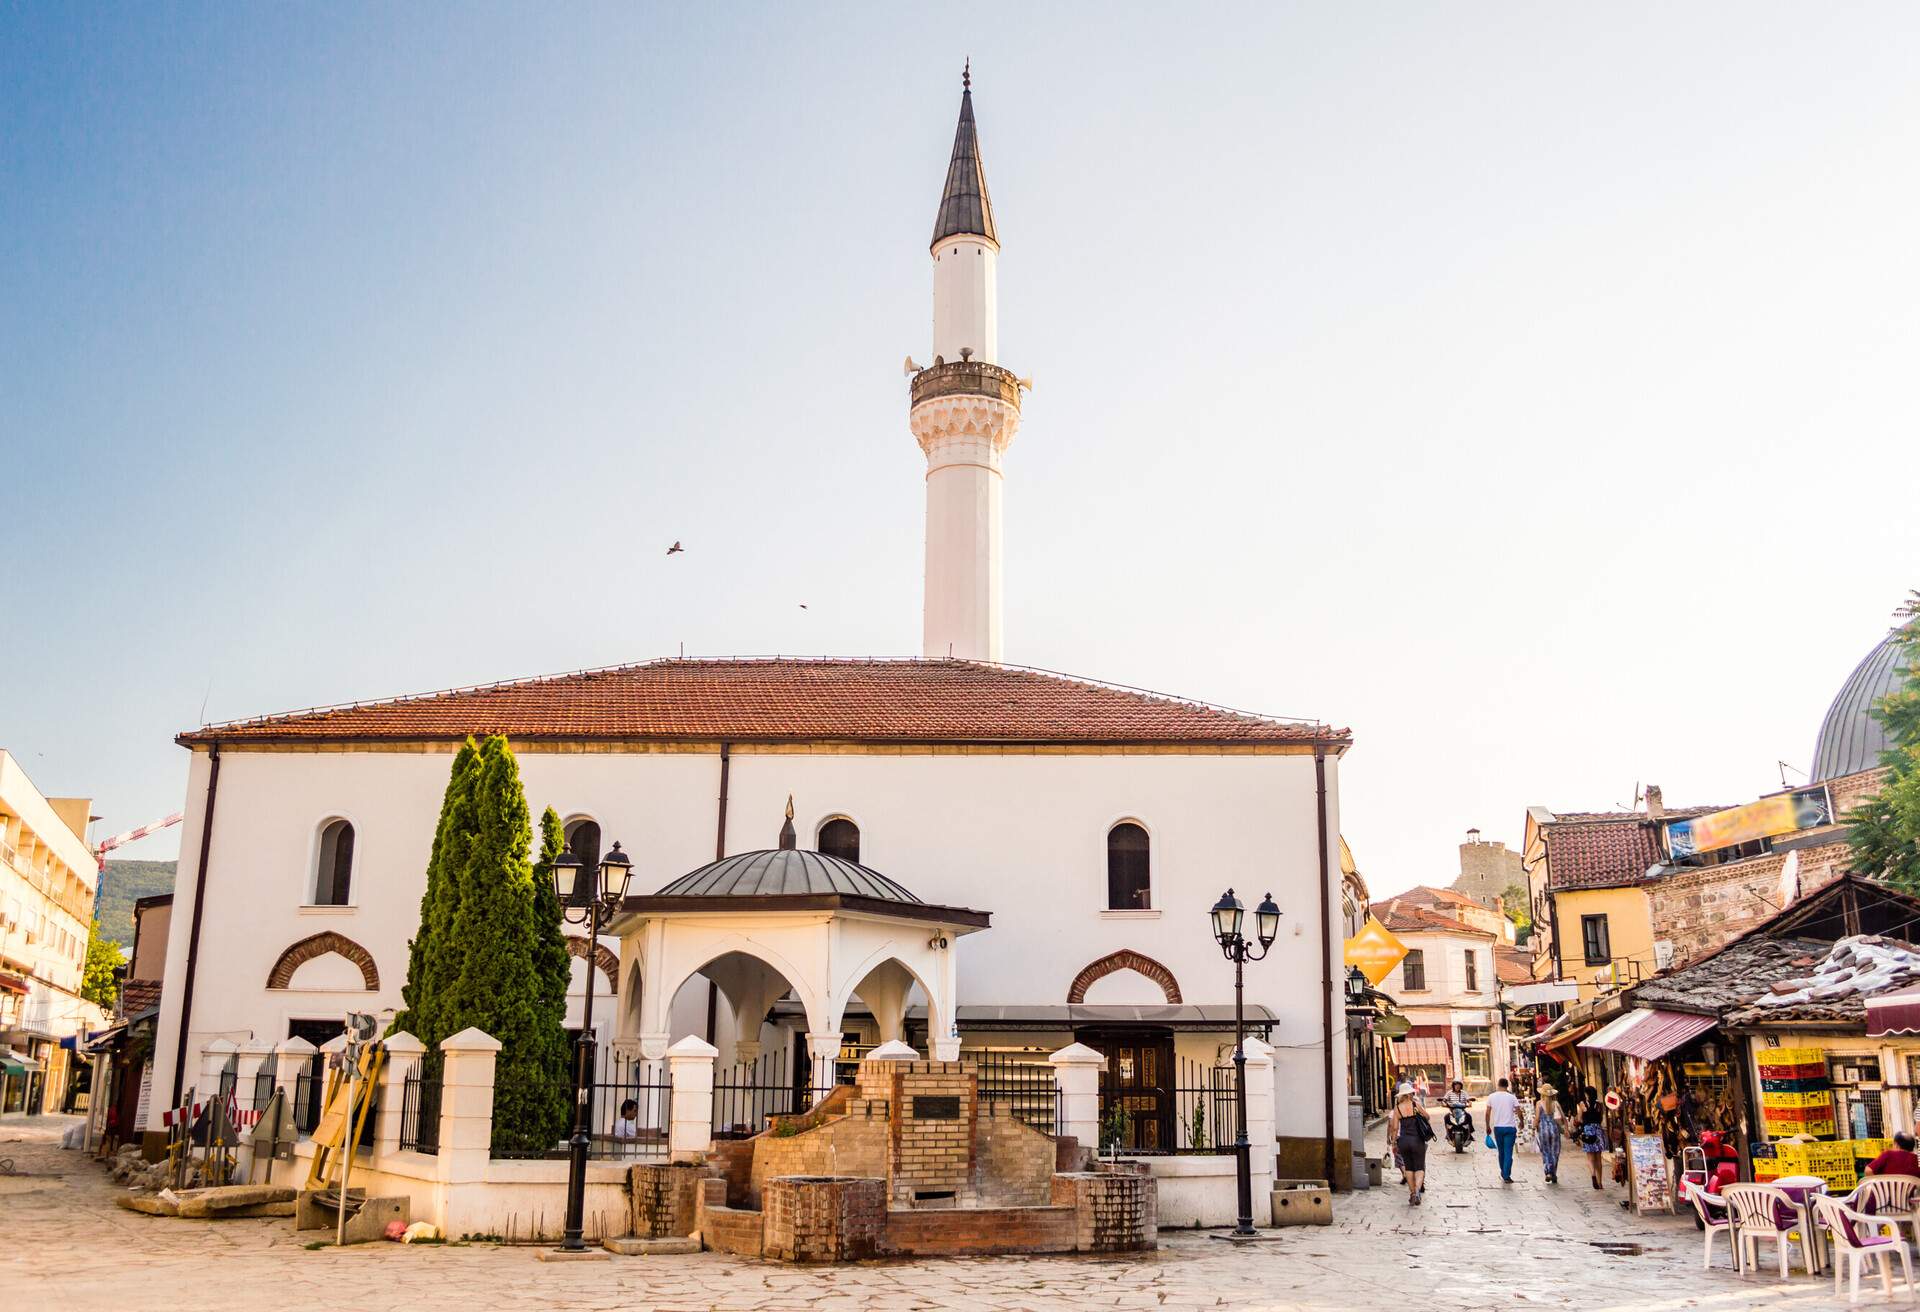 Murat Pasha Mosque located in the Old Bazaar of Skopje, Macedonia Cheap holiday destinations 2023